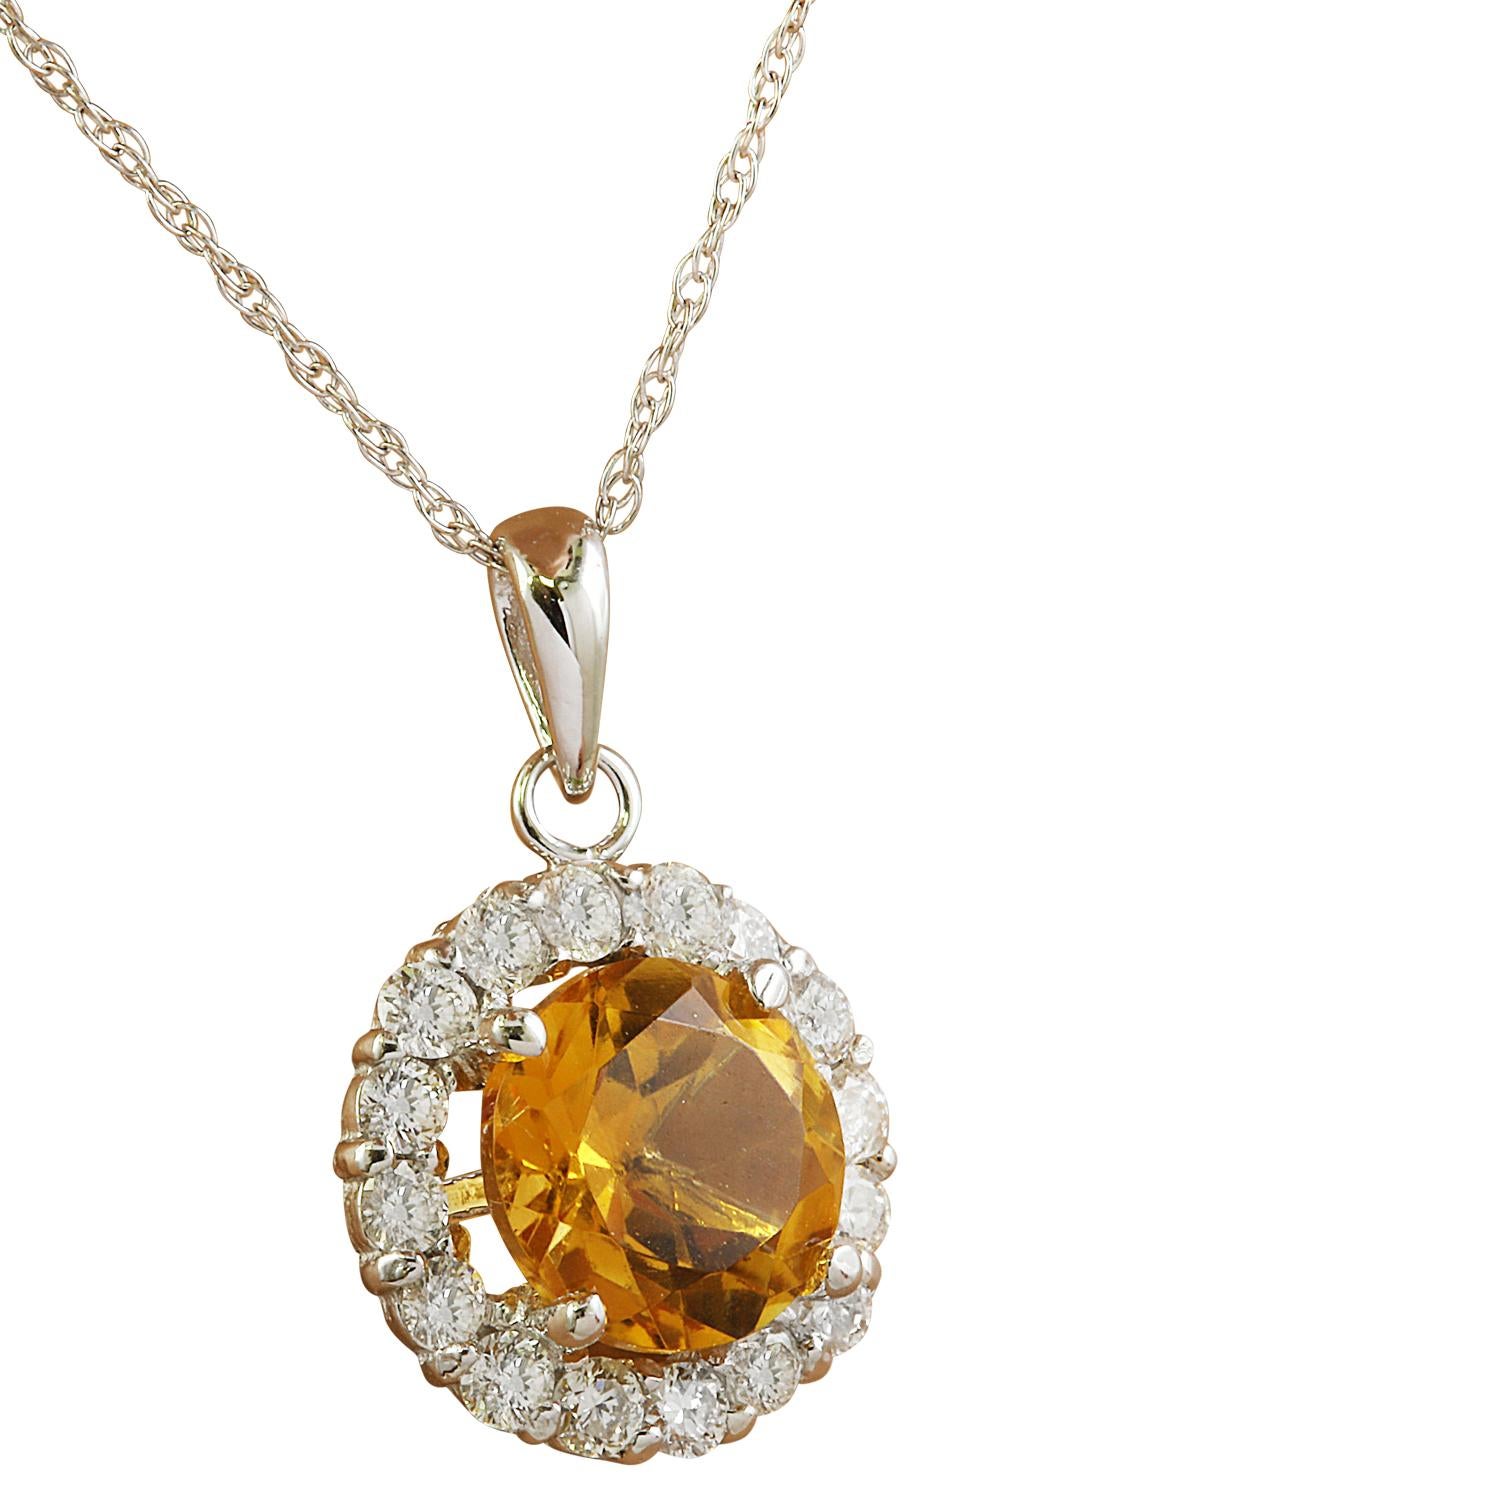 1.82 Carat Natural Citrine 14 Karat Solid White Gold Diamond Necklace
Stamped: 14K
Total Necklace Weight: 0.90 Grams
Necklace Length 18 Inches
Citrine Weight: 1.50 Carat (7.00x7.00 Millimeters)
Diamond Weight: 0.32 Carat (F-G Color, VS2-SI1 Clarity)